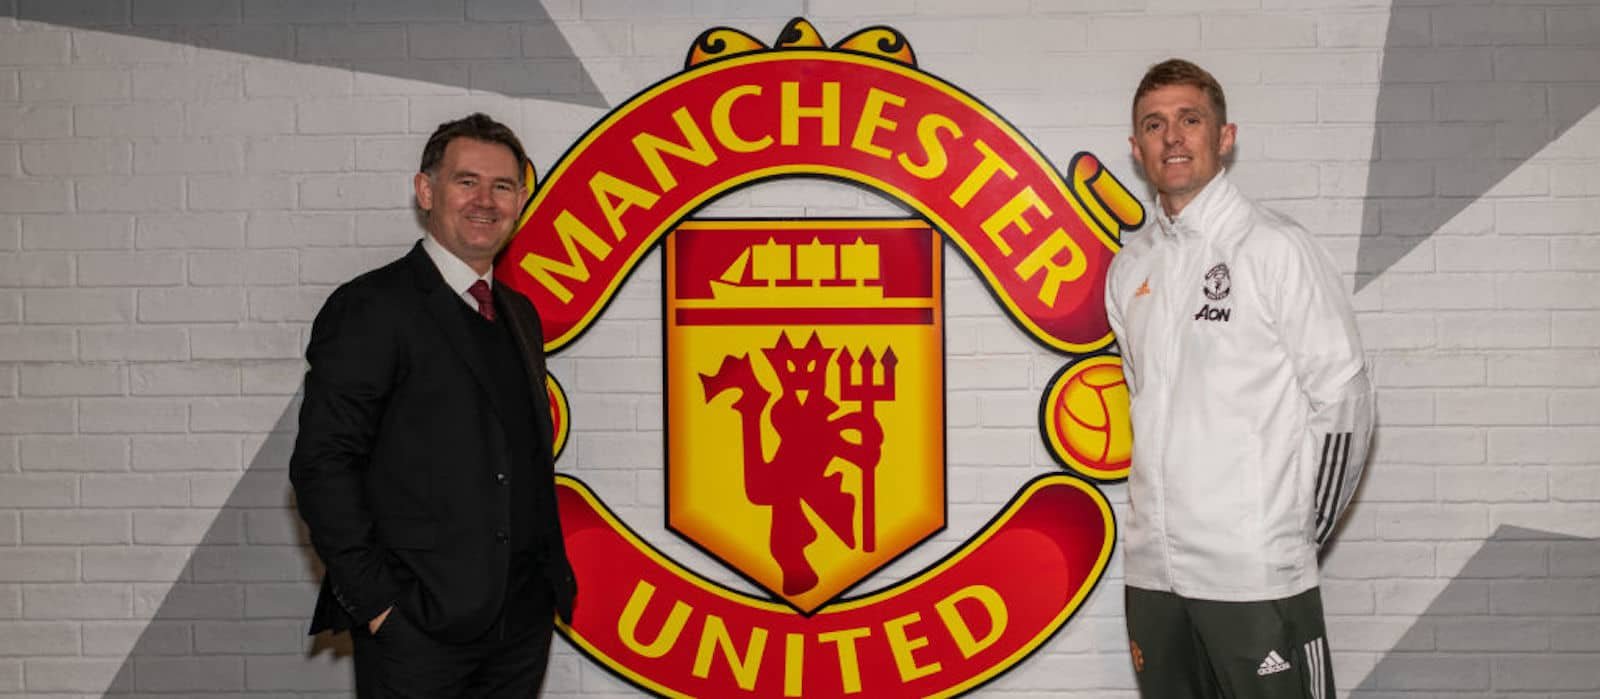 Football director John Murtough is also “definitely” leaving Manchester United – Man United News And Transfer News